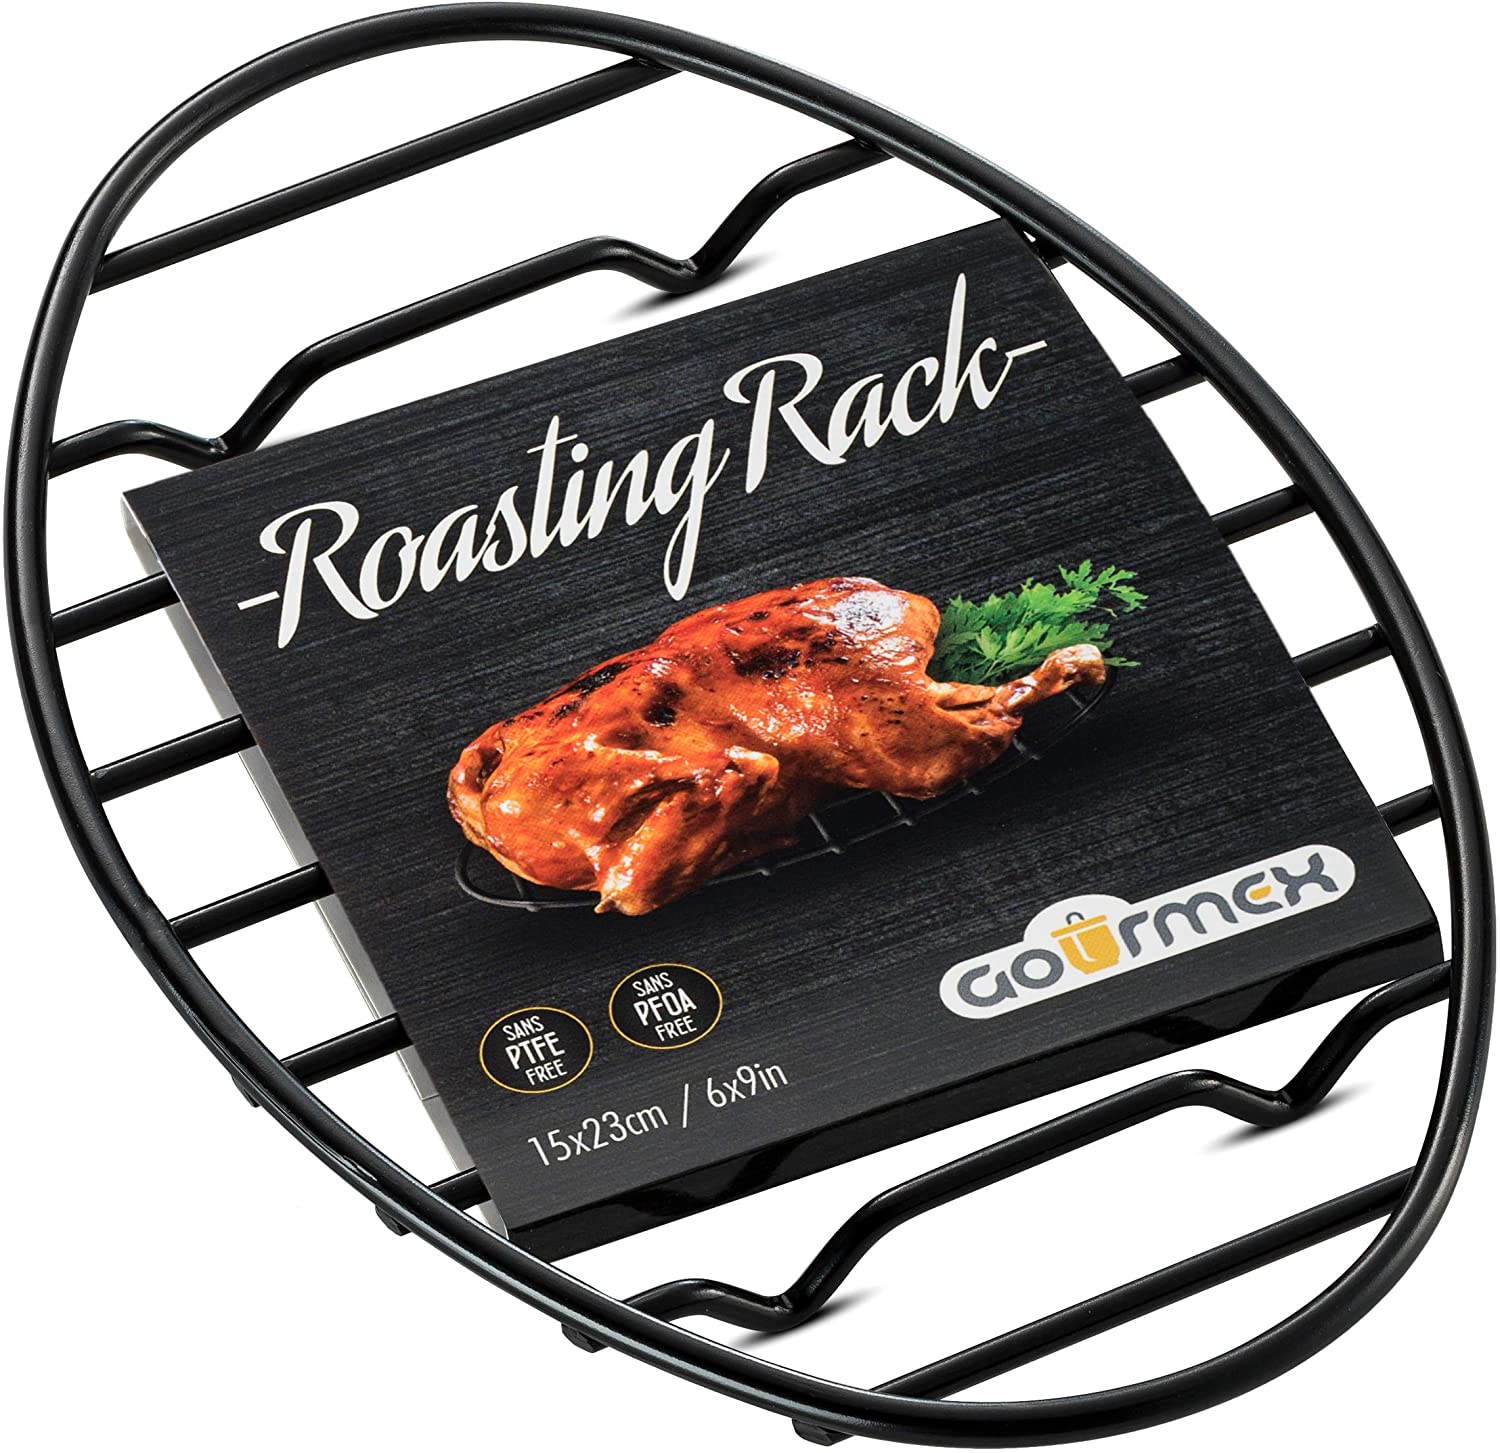 Oval Roasting Rack With Integrated Feet, Black - Non-stick Whitford Coating 8.5x12""